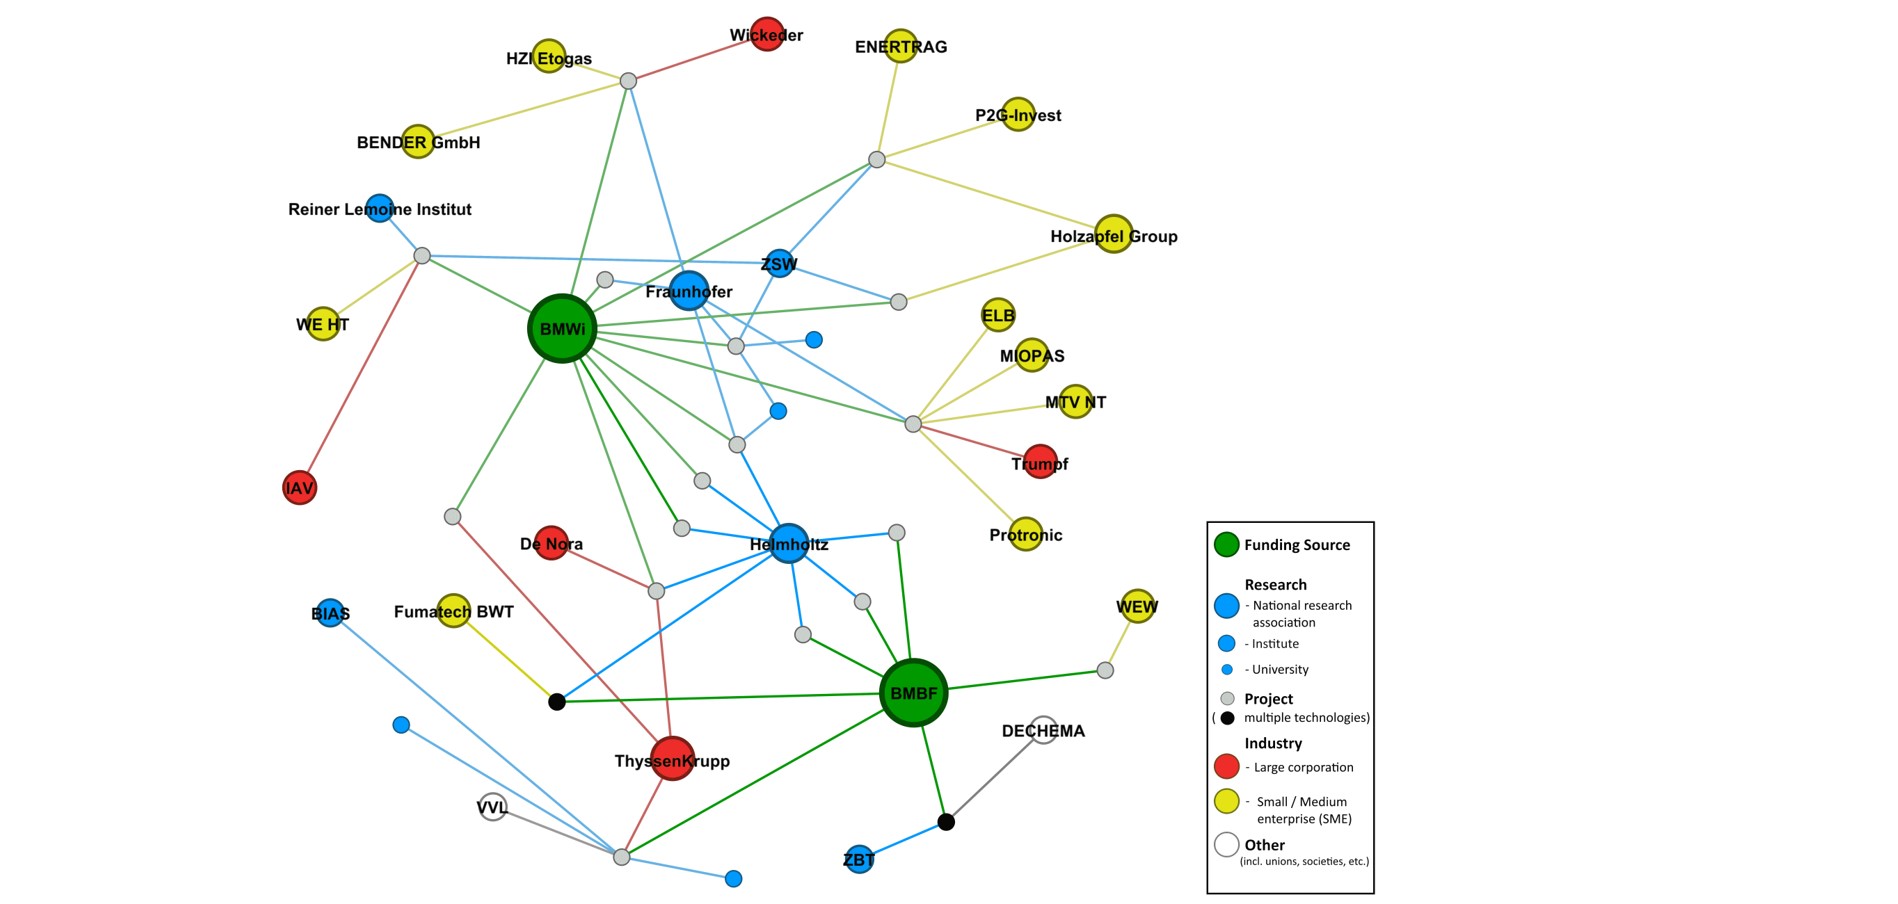 Figure 4: Network graph for public funding of projects related to alkaline electrolysis in Germany.